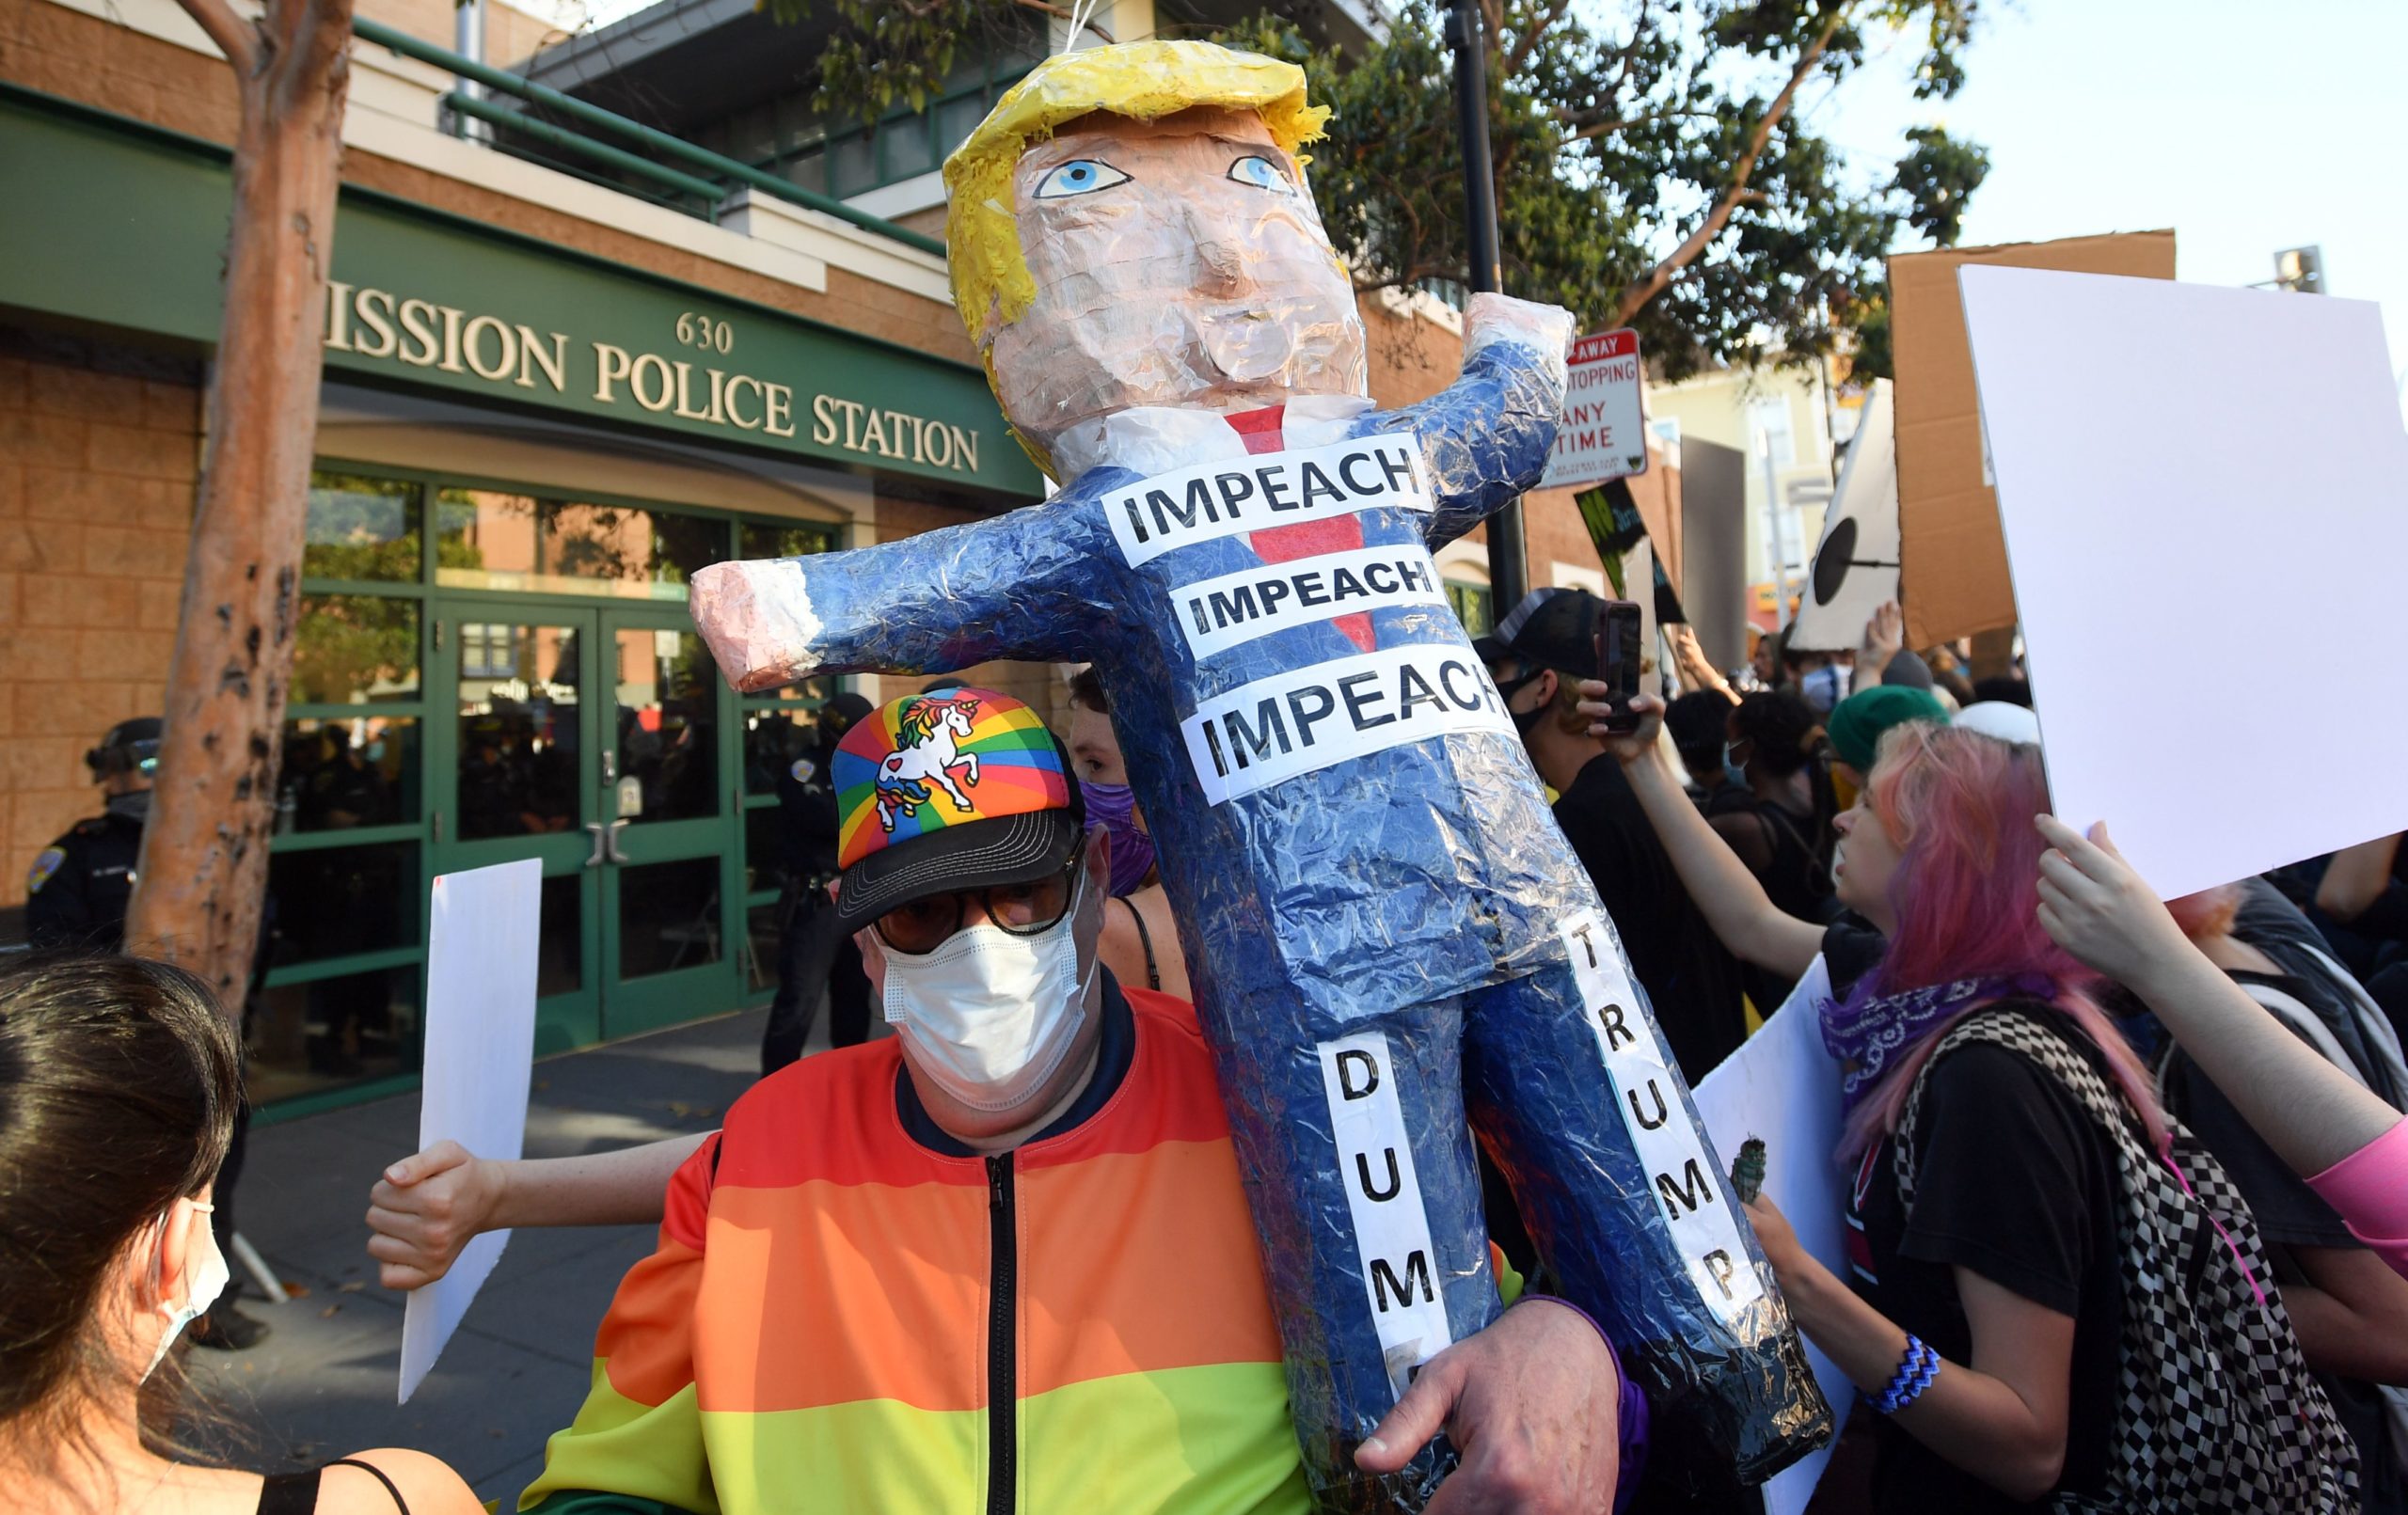 A protester holds a Donald Trump pinata as a crowd gathers in front of a San Francisco police station in San Francisco, California on June 3, 2020. - Thousands of people gathered at Dolores Park and marched through the city in support of George Floyd and against police brutality. (Photo by Josh Edelson / AFP) (Photo by JOSH EDELSON/AFP via Getty Images)